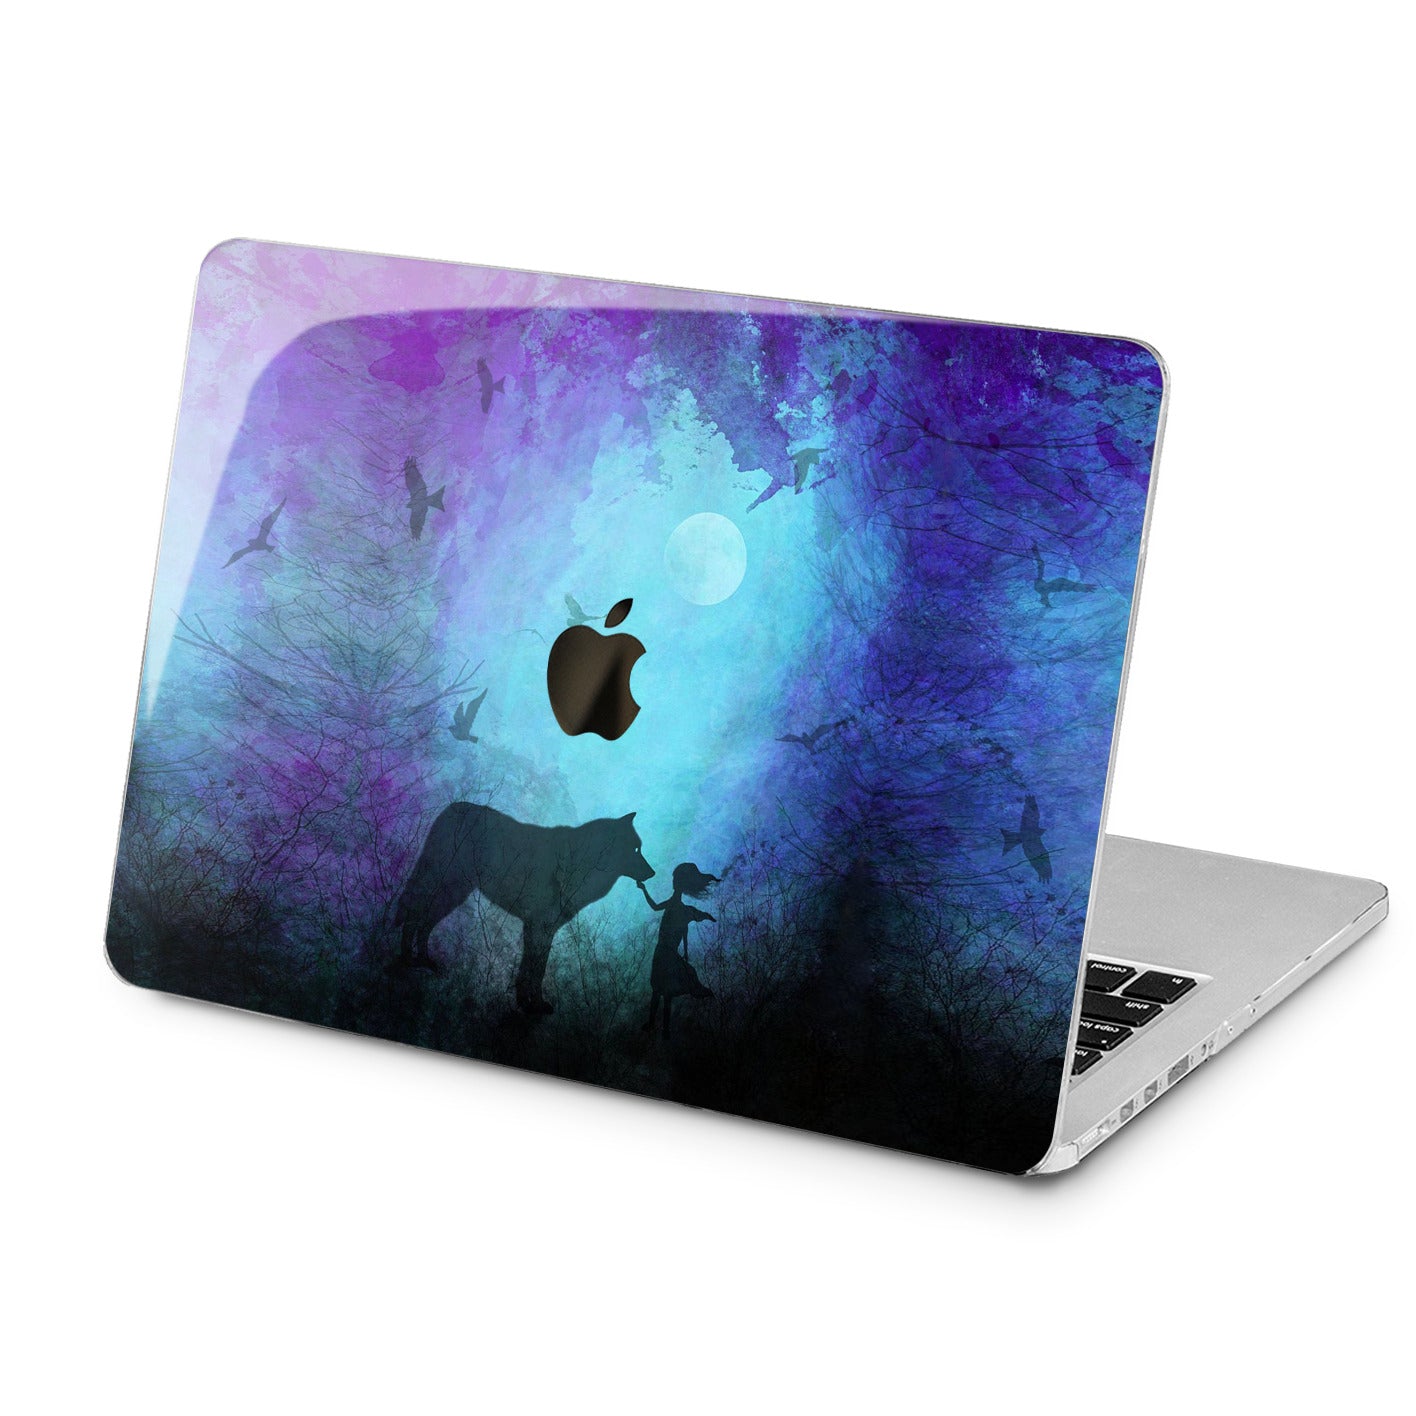 Lex Altern Lex Altern Girl and Wolf Case for your Laptop Apple Macbook.